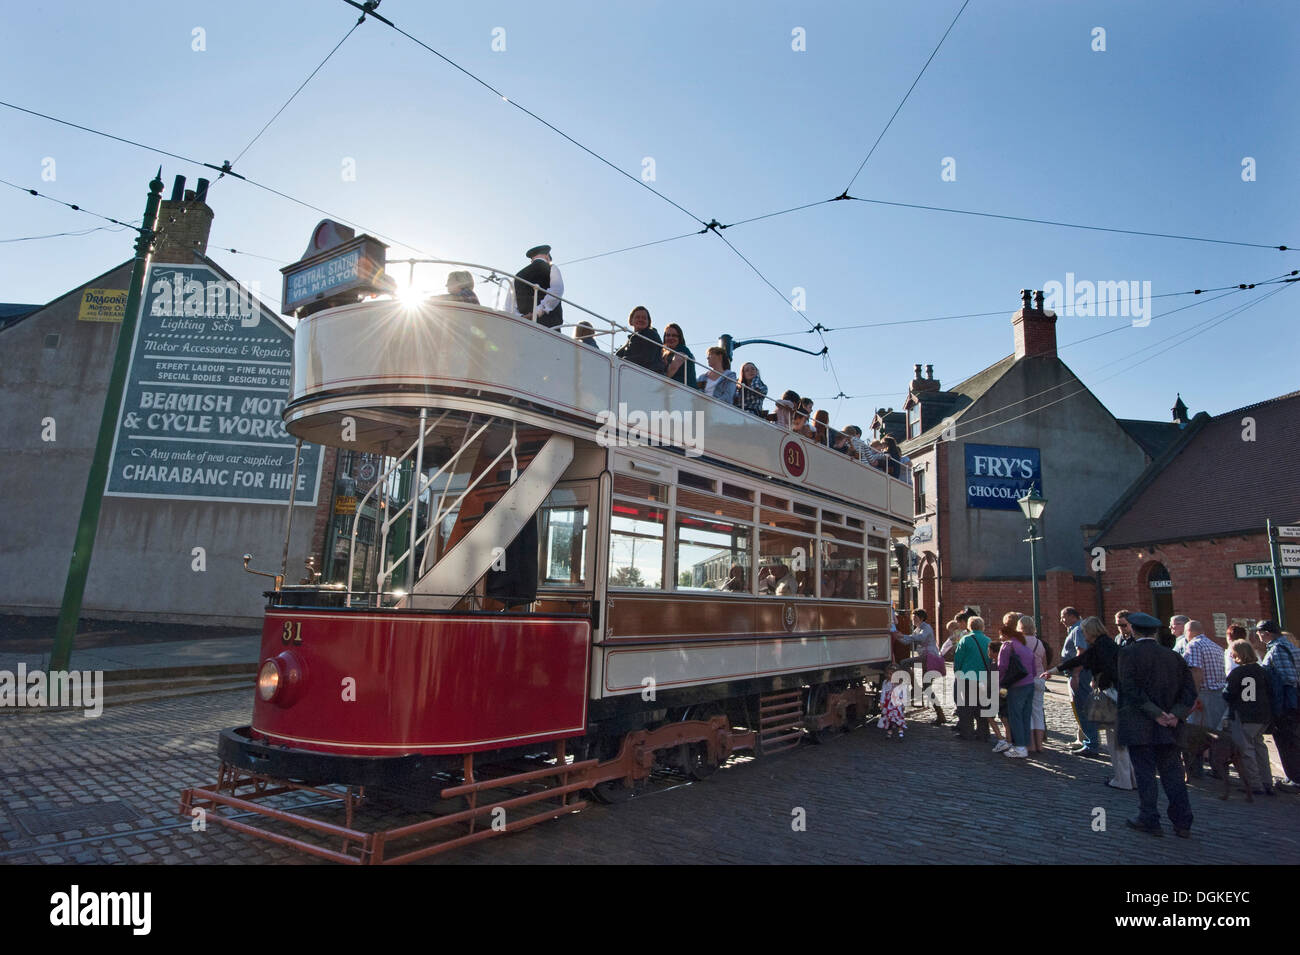 A Tram Driver counts his passengers on the top deck of a preserved former Blackpool Tram. Stock Photo